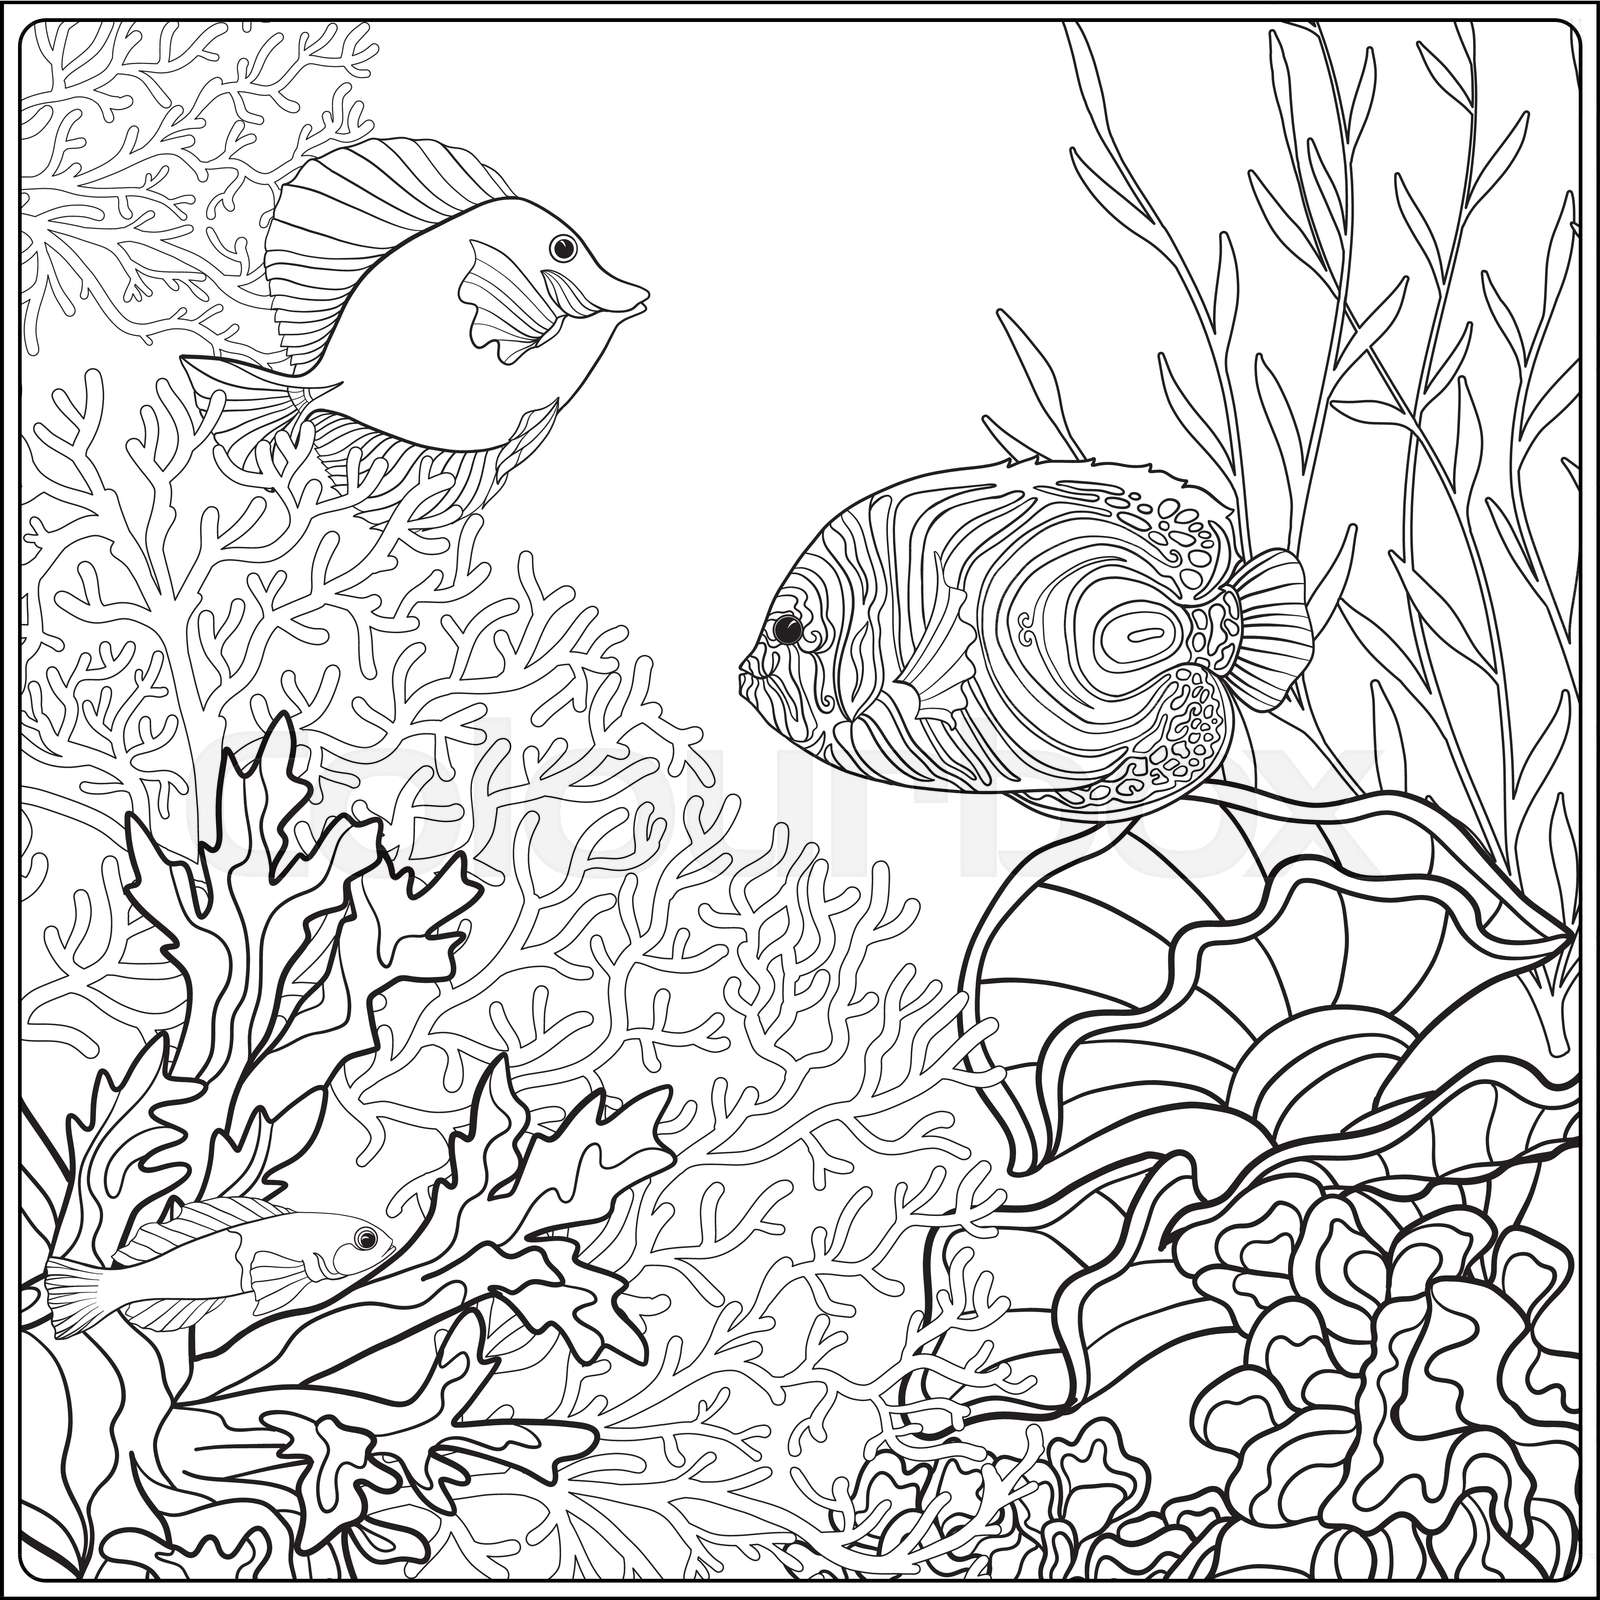 Coloring page with underwater world coral reef. Corals, fish and seaweeds.  | Stock vector | Colourbox